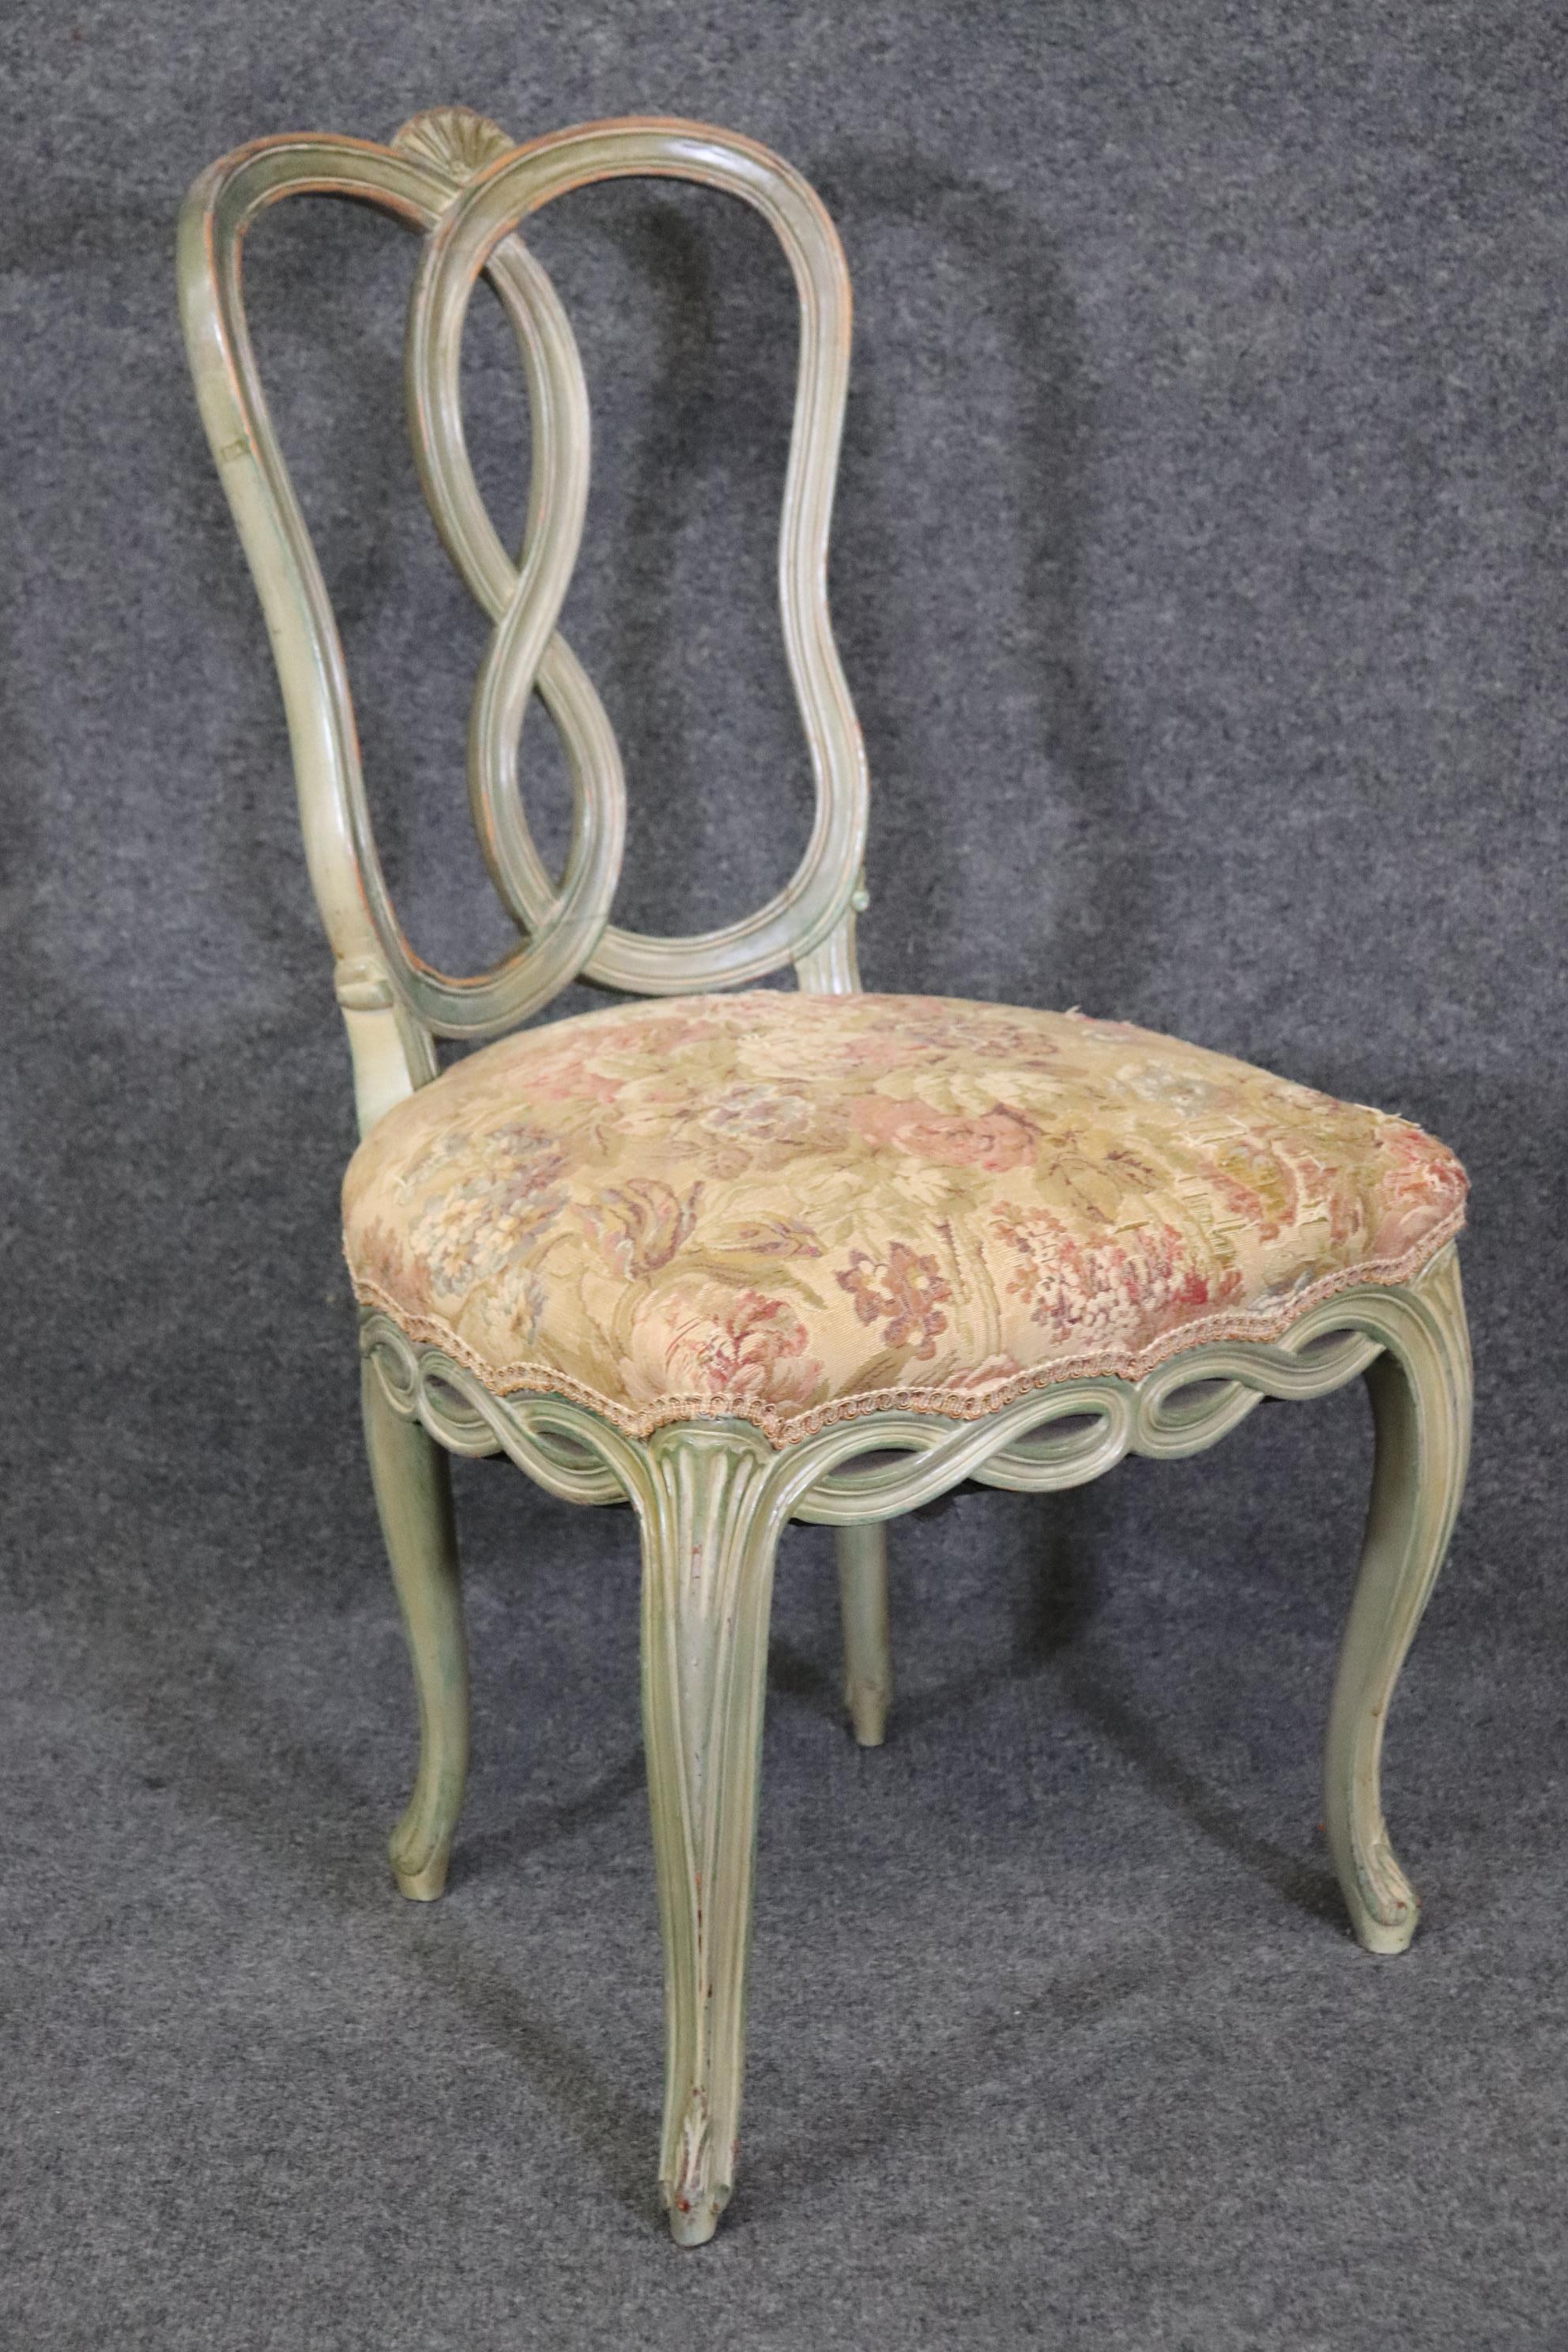 Dimensions- H: 36 1/4in W: 19 3/4in D: 22in SH: 19 3/4in 
This Set of 6 Swedish NeoClassical Paint Decorated Dining Chairs are an exceptional example of early 20th century decorative Swedish/Neoclassical furniture. This set is made of the highest